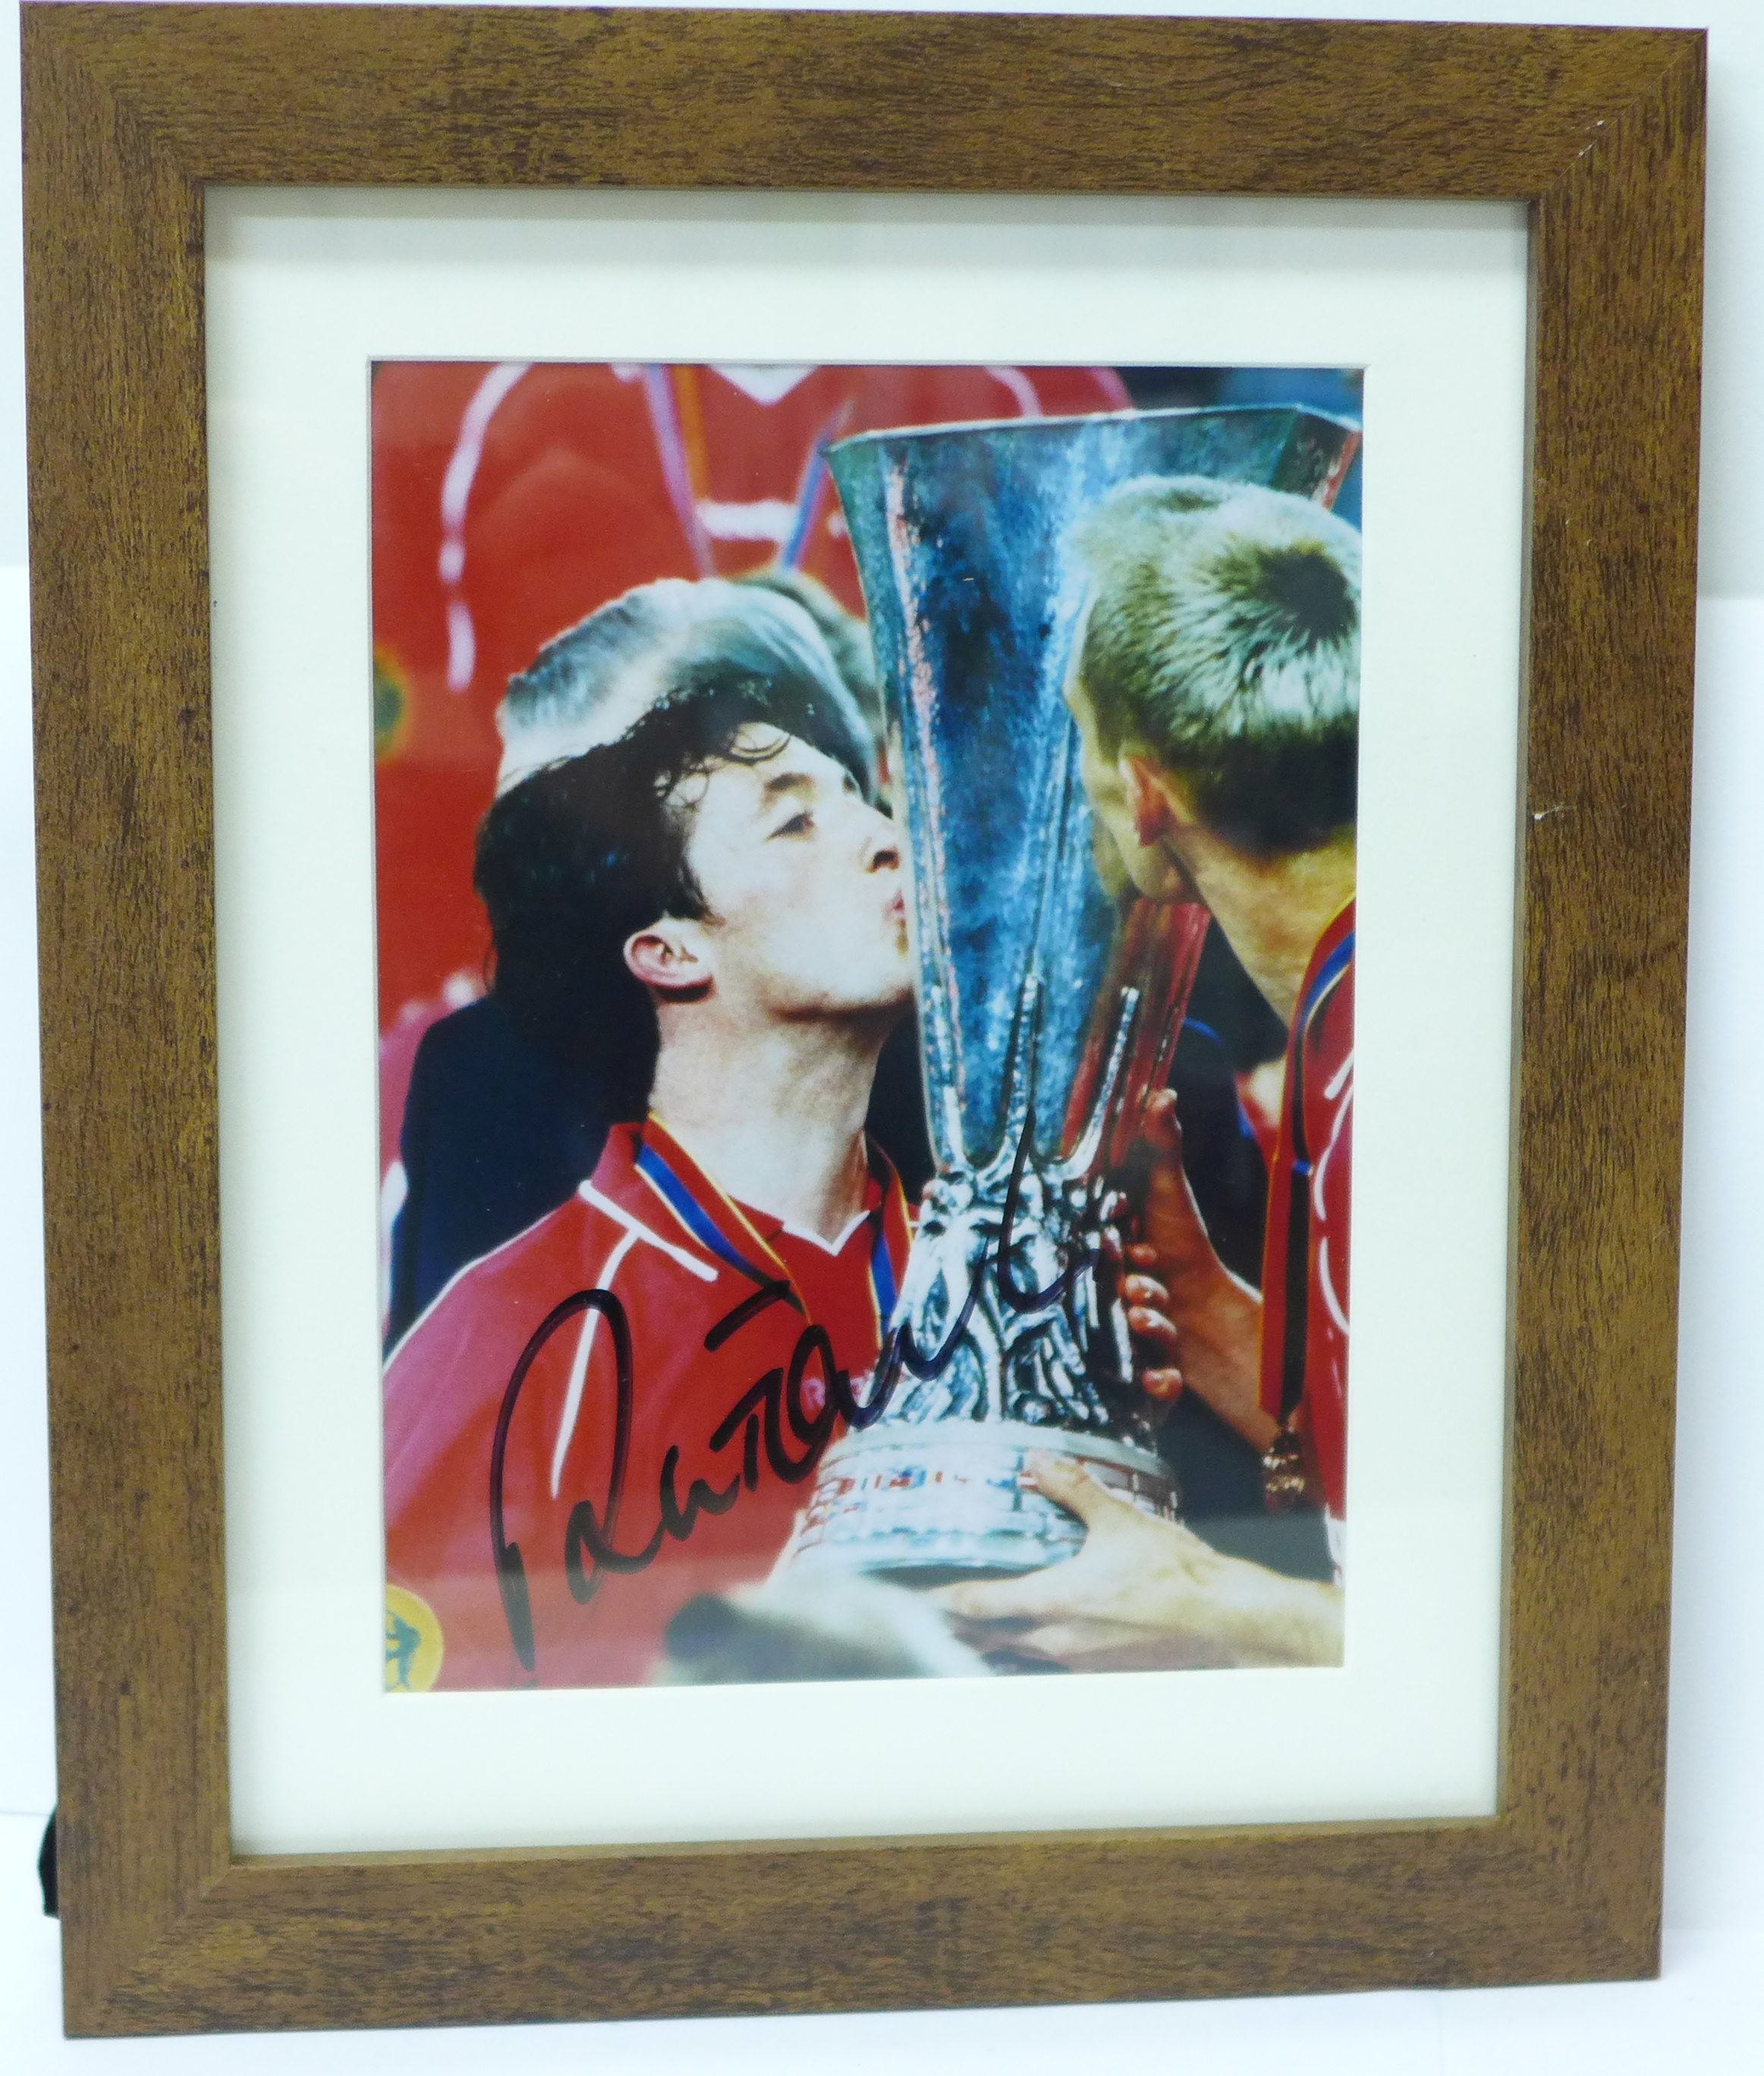 A framed signed photograph of Robbie Fowler with UEFA Cup